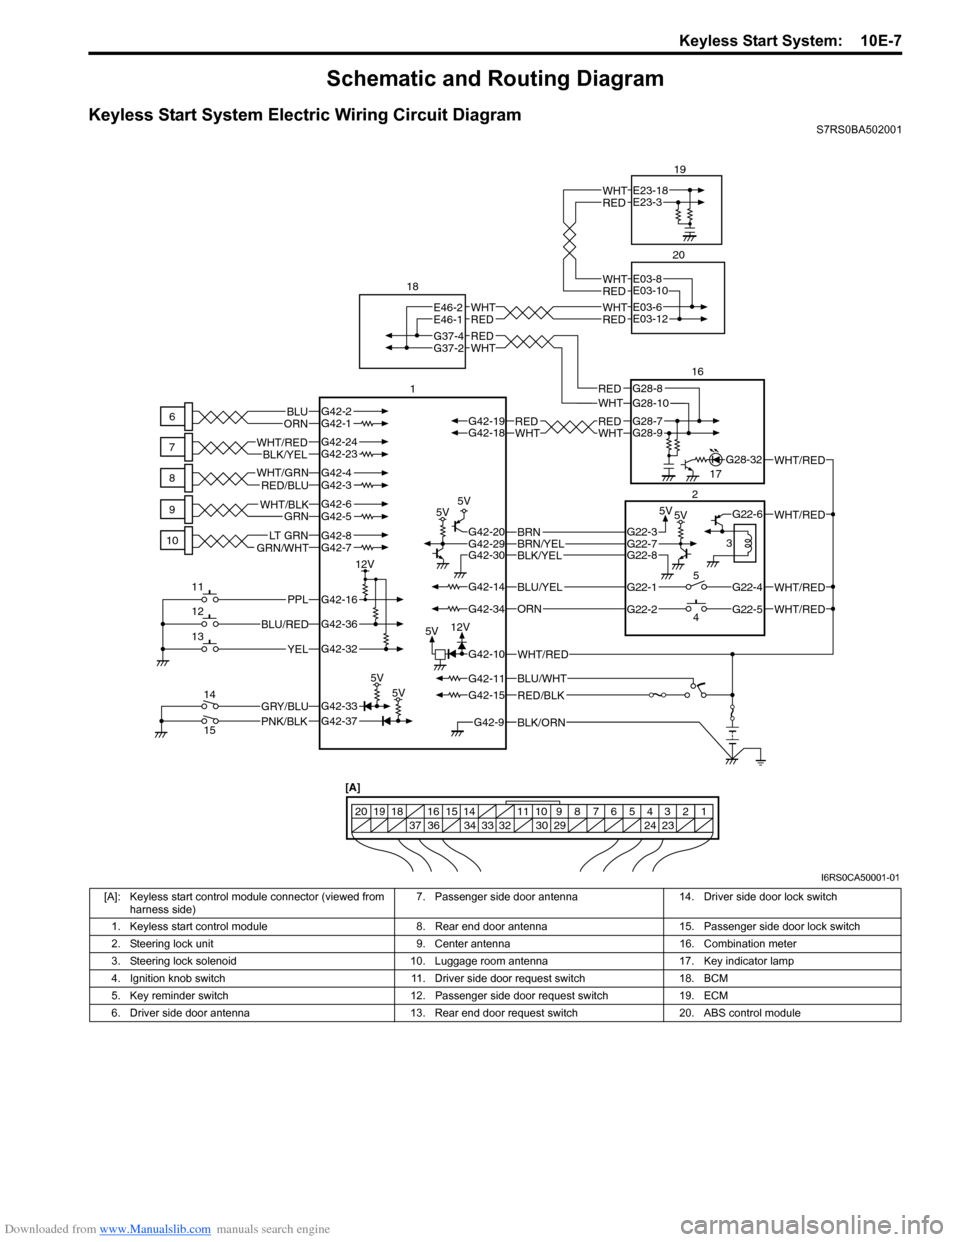 SUZUKI SWIFT 2006 2.G Service Workshop Manual Downloaded from www.Manualslib.com manuals search engine Keyless Start System:  10E-7
Schematic and Routing Diagram
Keyless Start System Electric Wiring Circuit DiagramS7RS0BA502001
BLK/ORNG42-9
G42-1